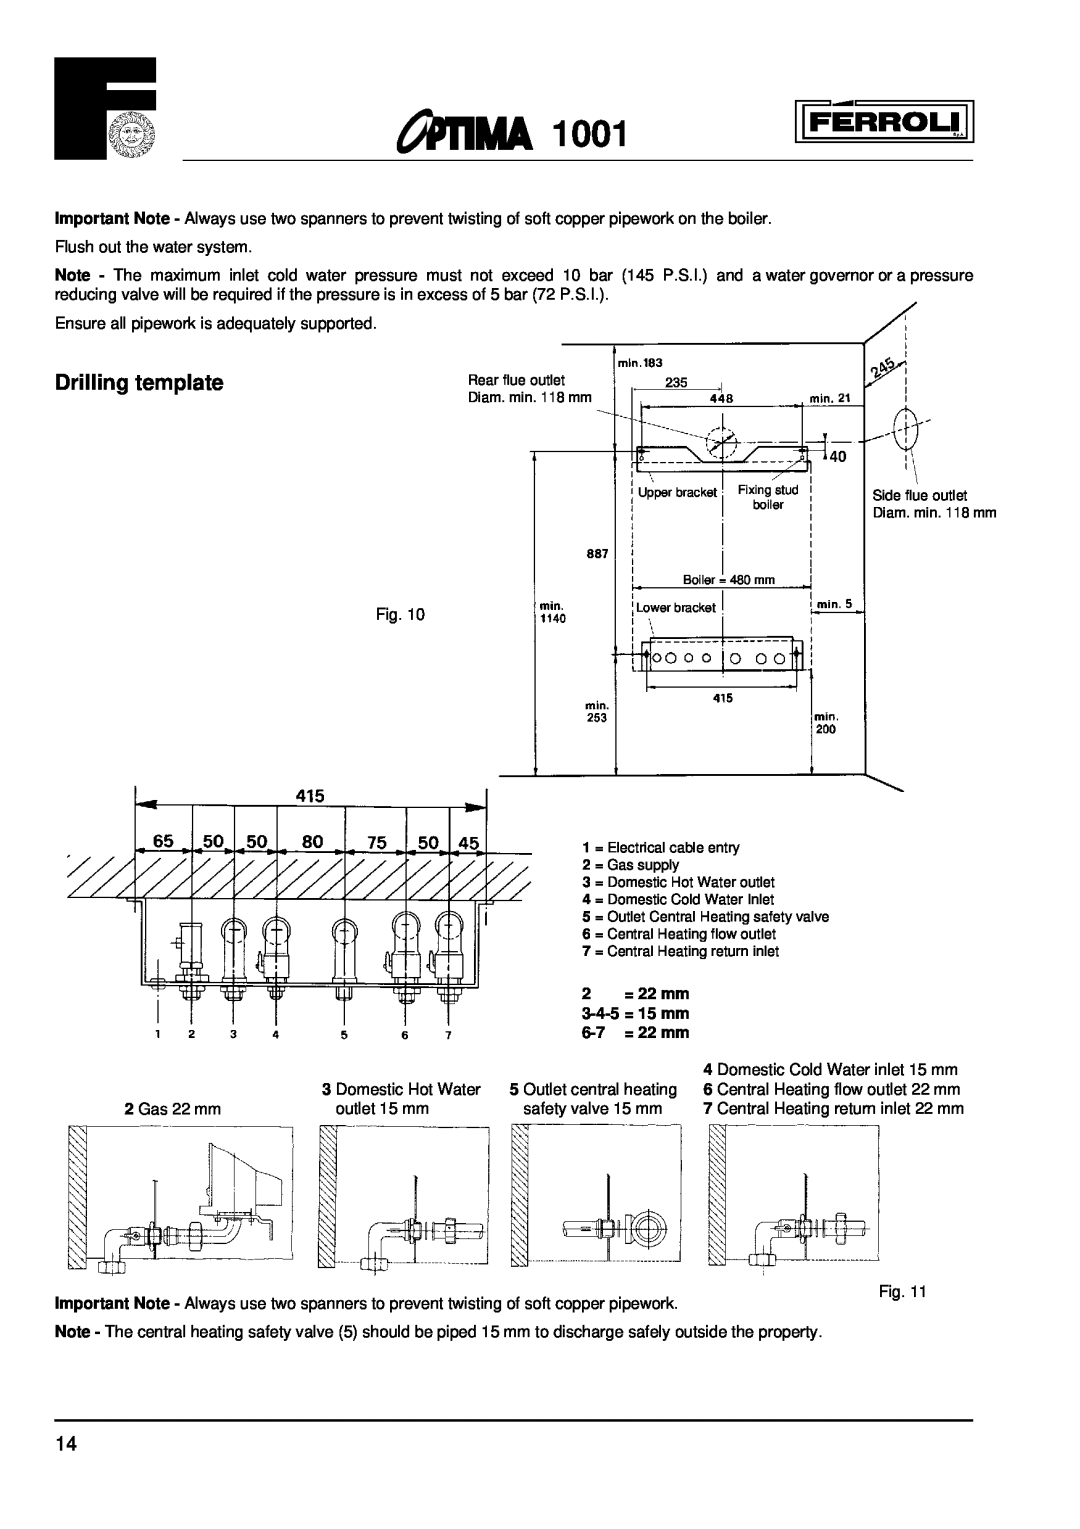 Optima Company 1001 installation instructions Drilling template, 2 = 22 mm 3-4-5= 15 mm 6-7= 22 mm 